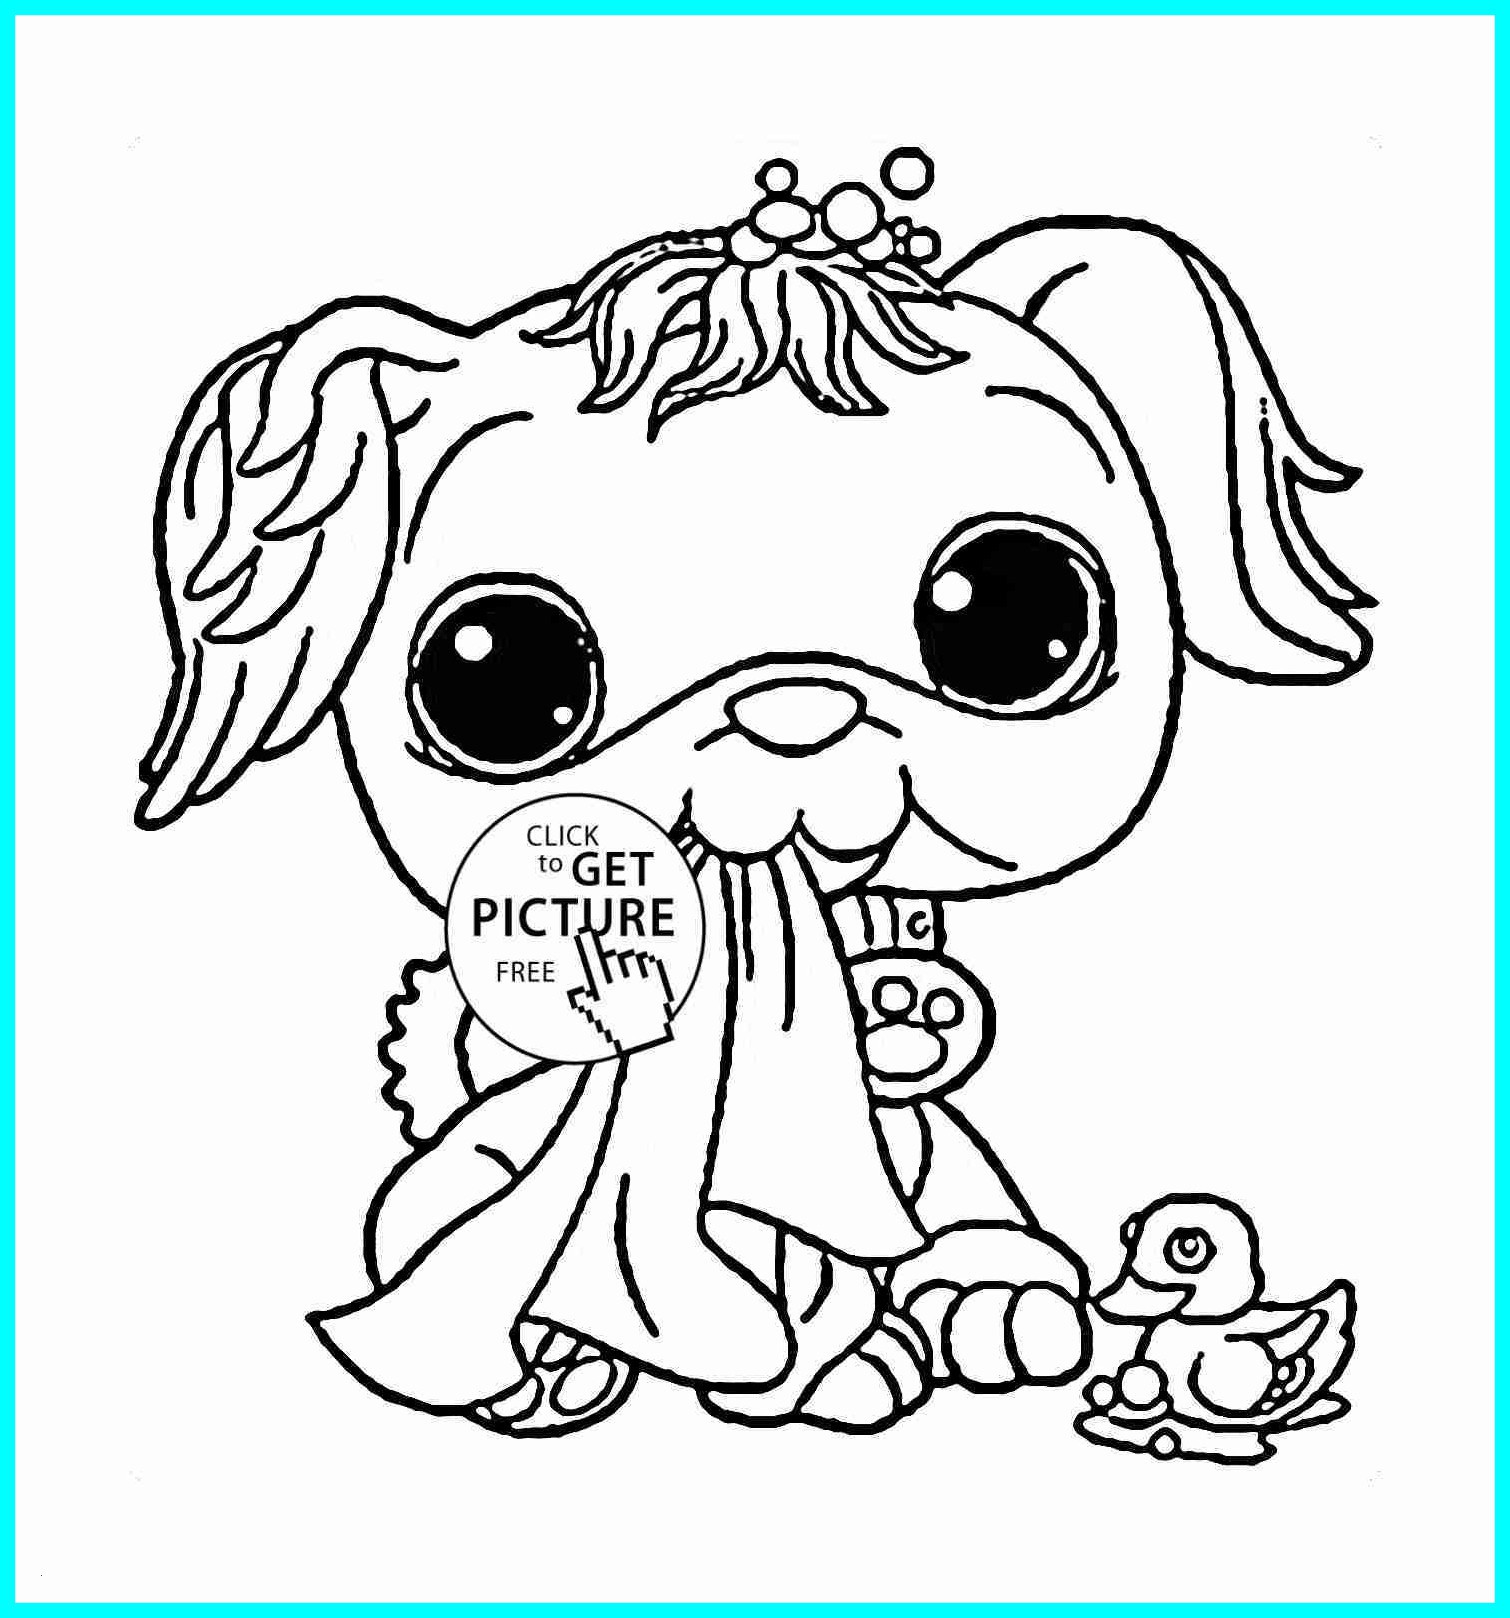 Littlest Pet Shop Coloring Pages Fabulous Fascinating Puppy Dog Pals Coloring Pages to Print Pic Little